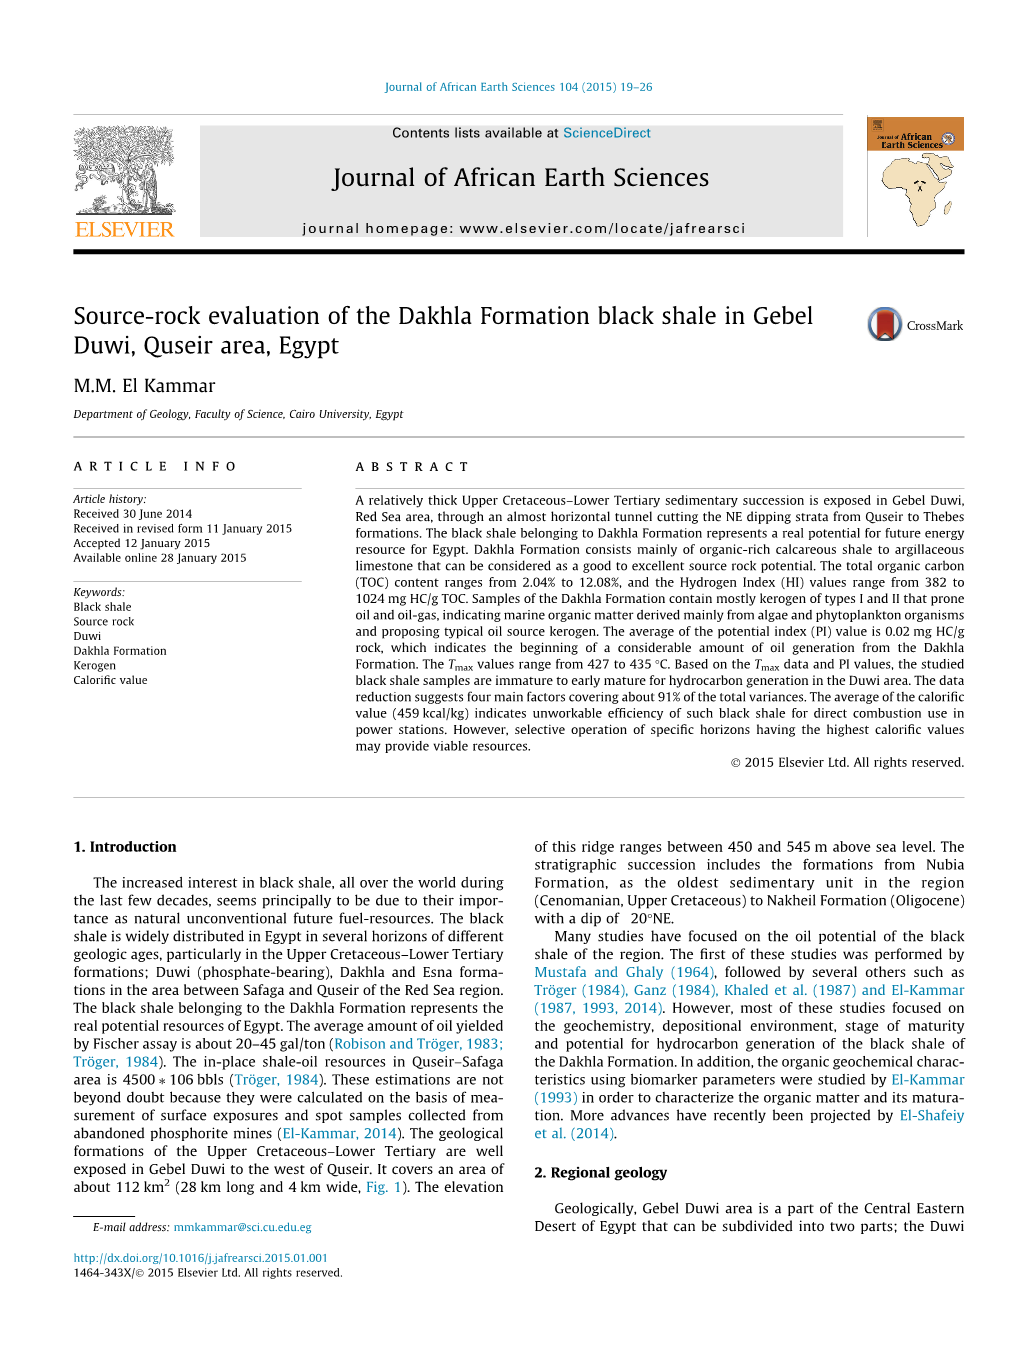 Source-Rock Evaluation of the Dakhla Formation Black Shale in Gebel Duwi, Quseir Area, Egypt